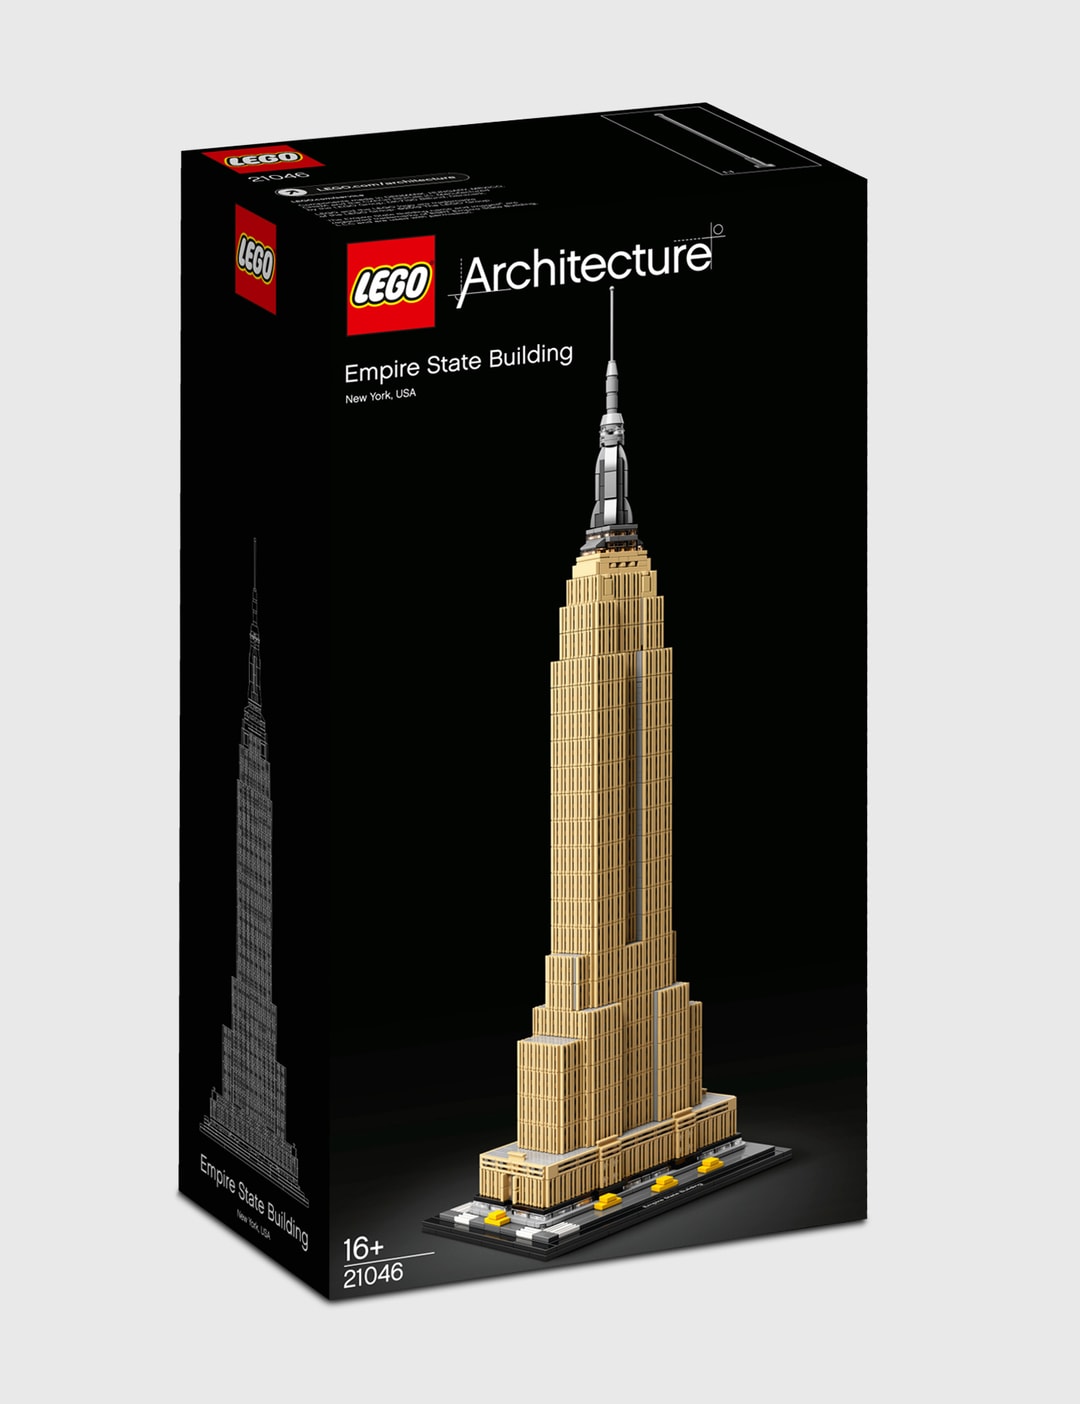 Algebraïsch Noord West Inloggegevens LEGO - Empire State Building | HBX - Globally Curated Fashion and Lifestyle  by Hypebeast